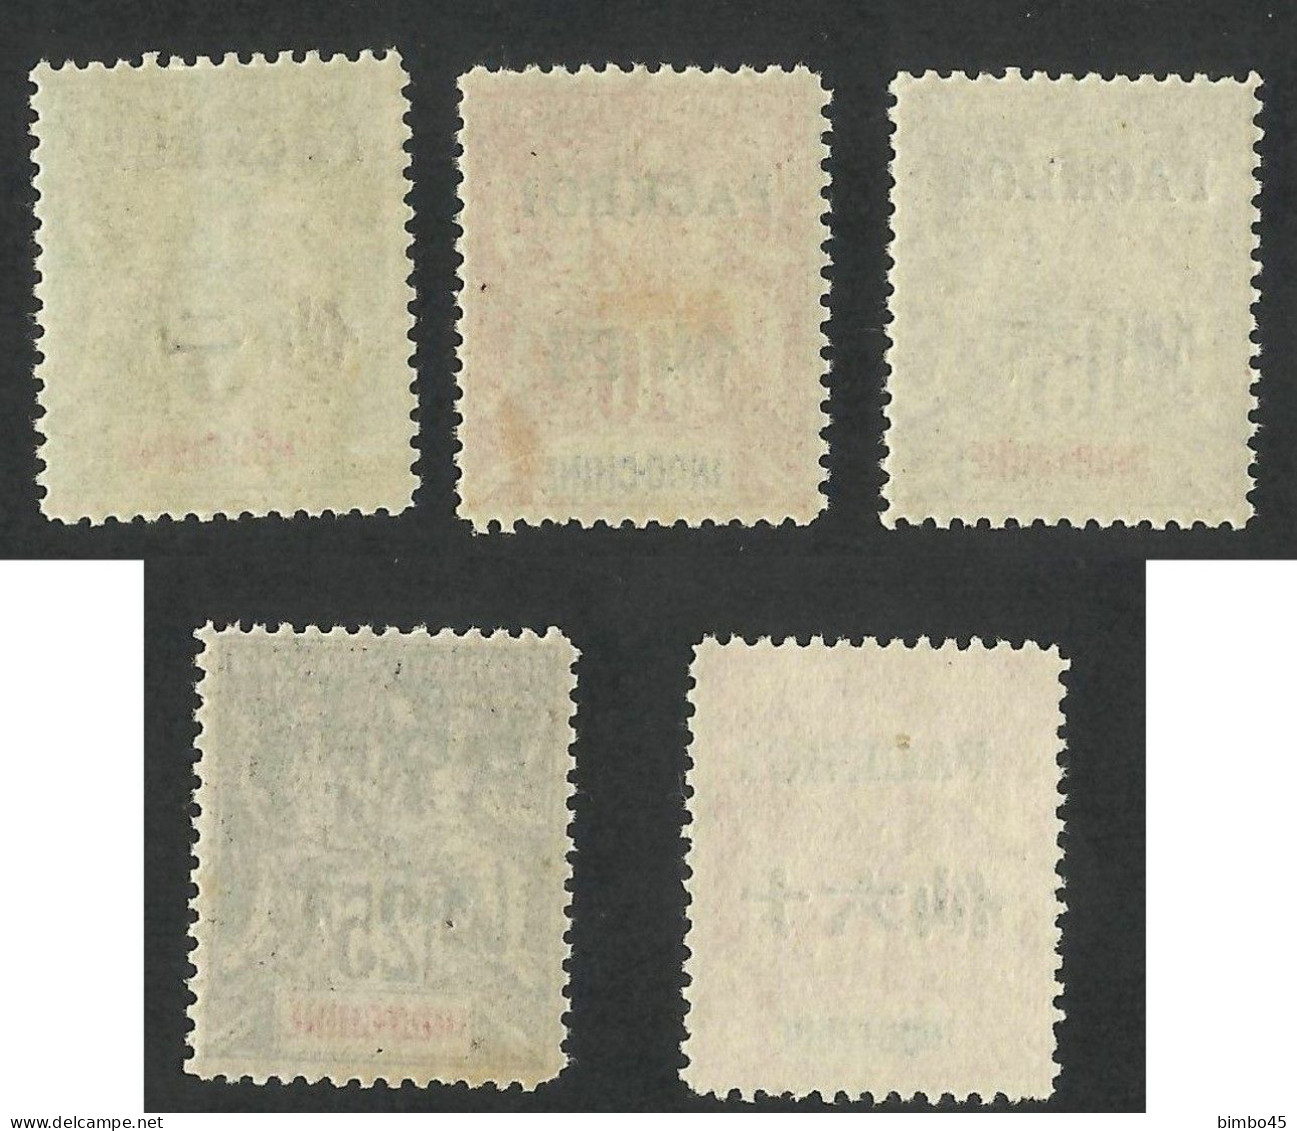 INDO-CHINE / FRENCH POST OFFICE IN PACKHOI /OVERPRINT ,,PACKHOI''-1902-1904 MNH & MLH - Forgery , Faux Fournier - Ungebraucht